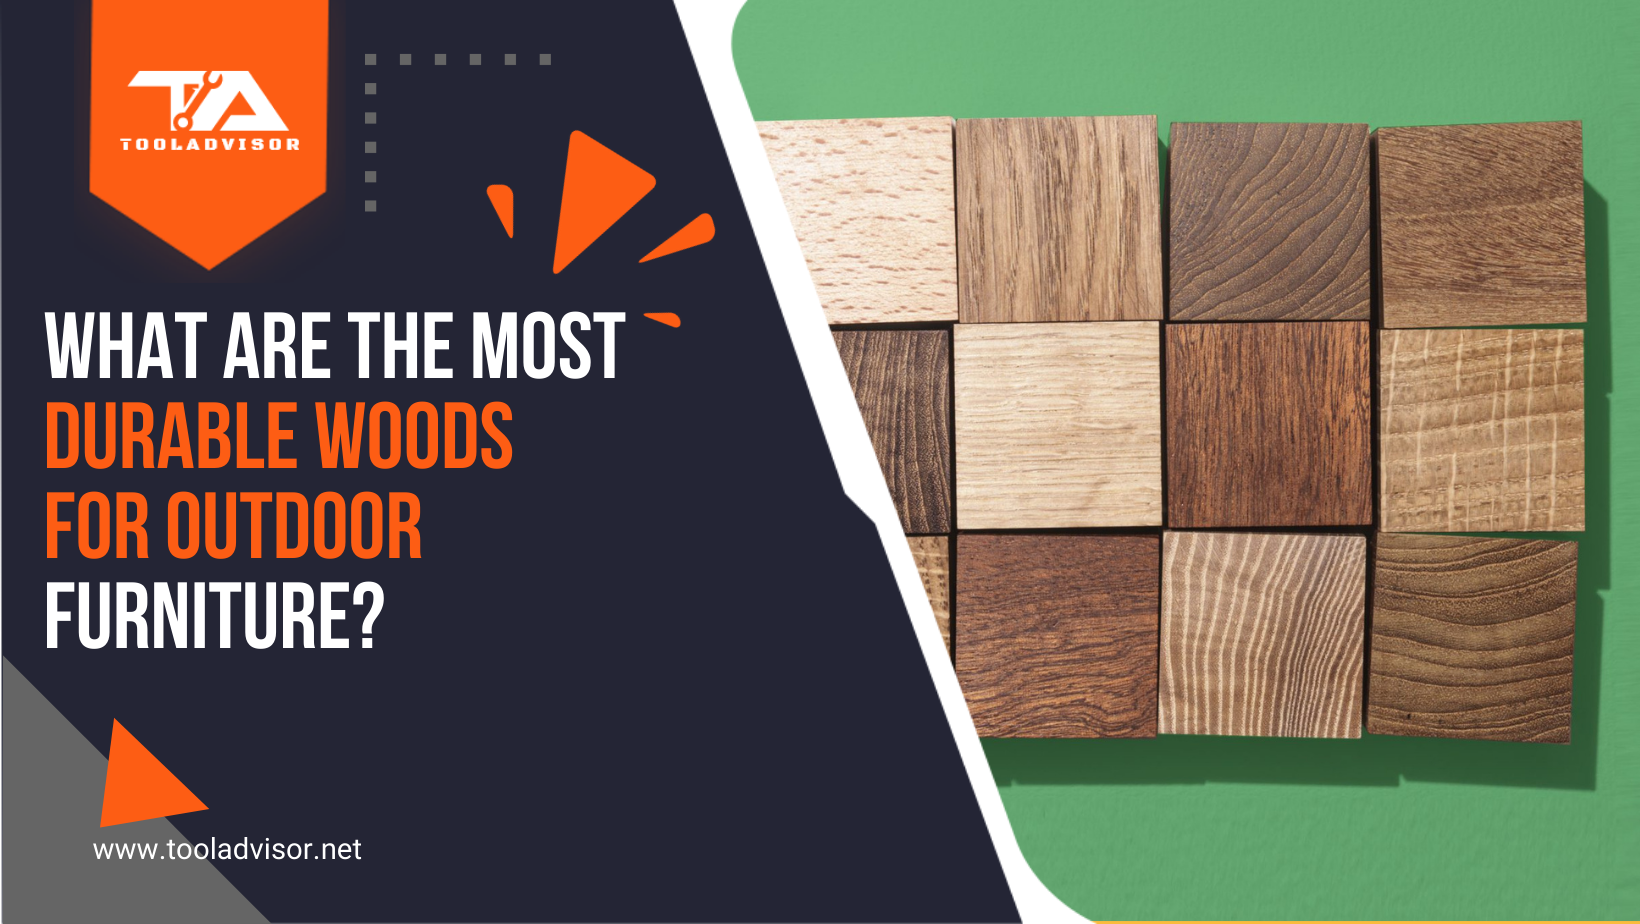 What are the Most Durable Woods for Outdoor Furniture?